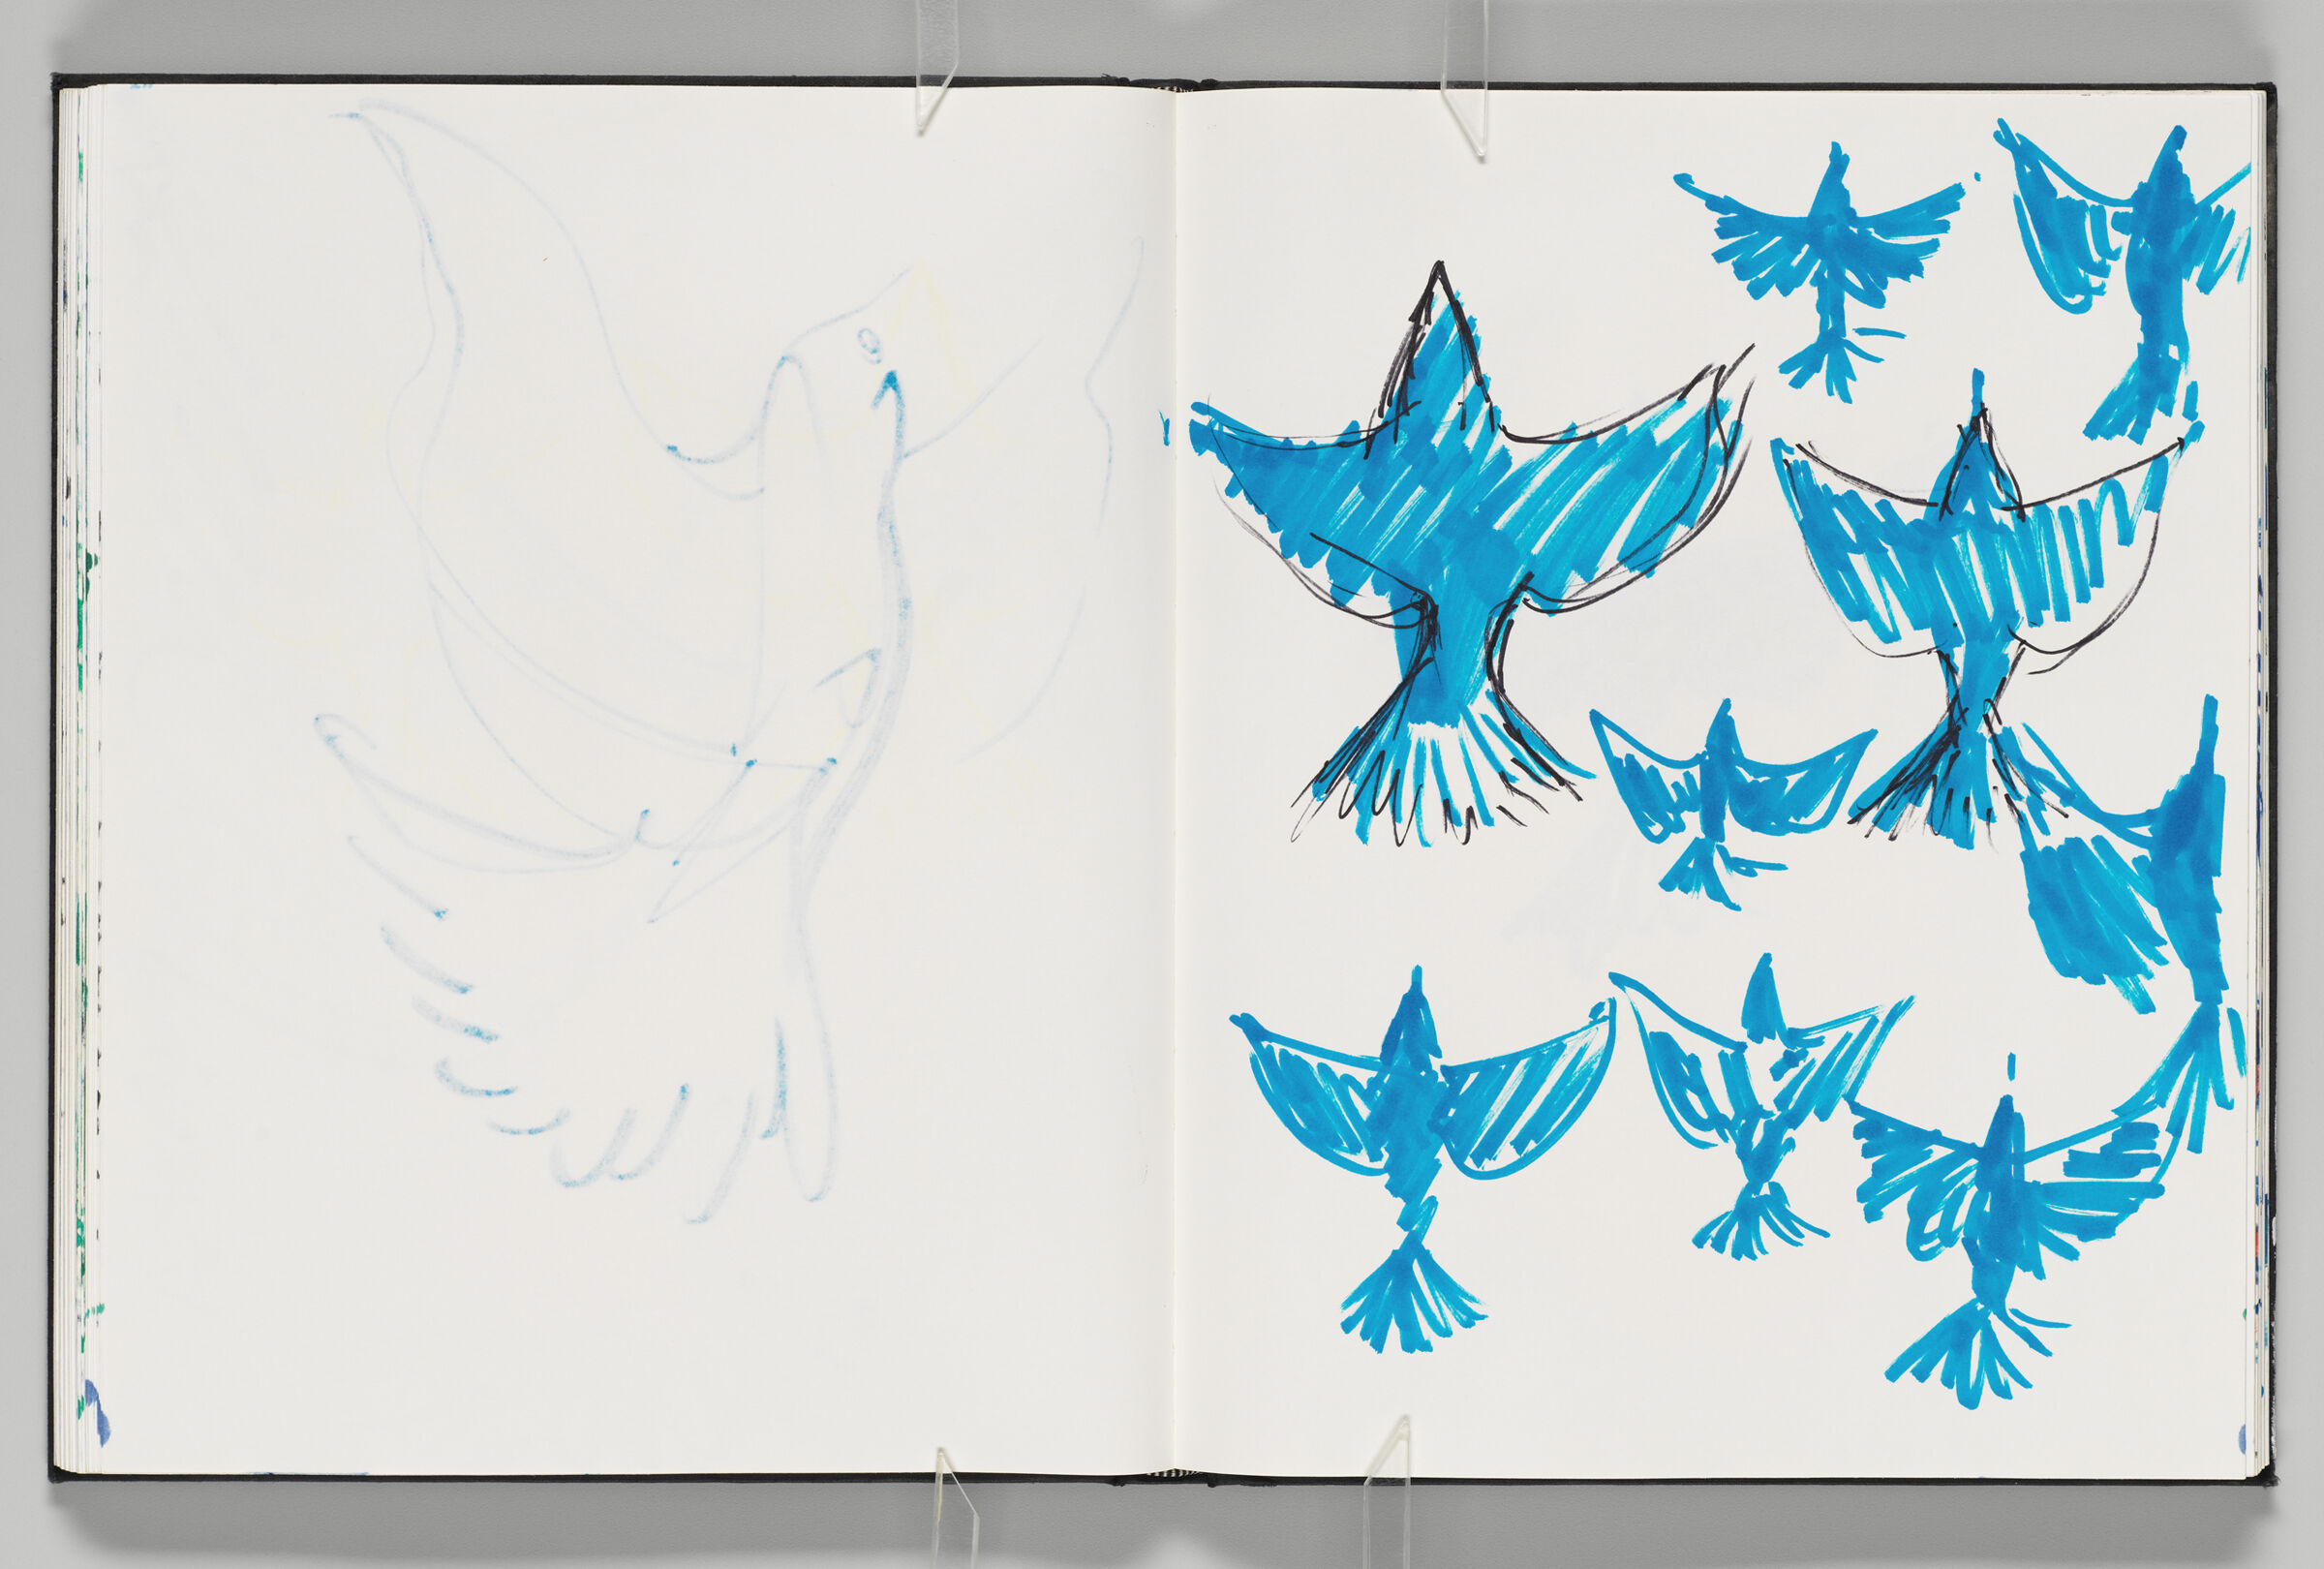 Untitled (Bleed-Through Of Previous Page, Left Page); Untitled (Doves, Right Page)
